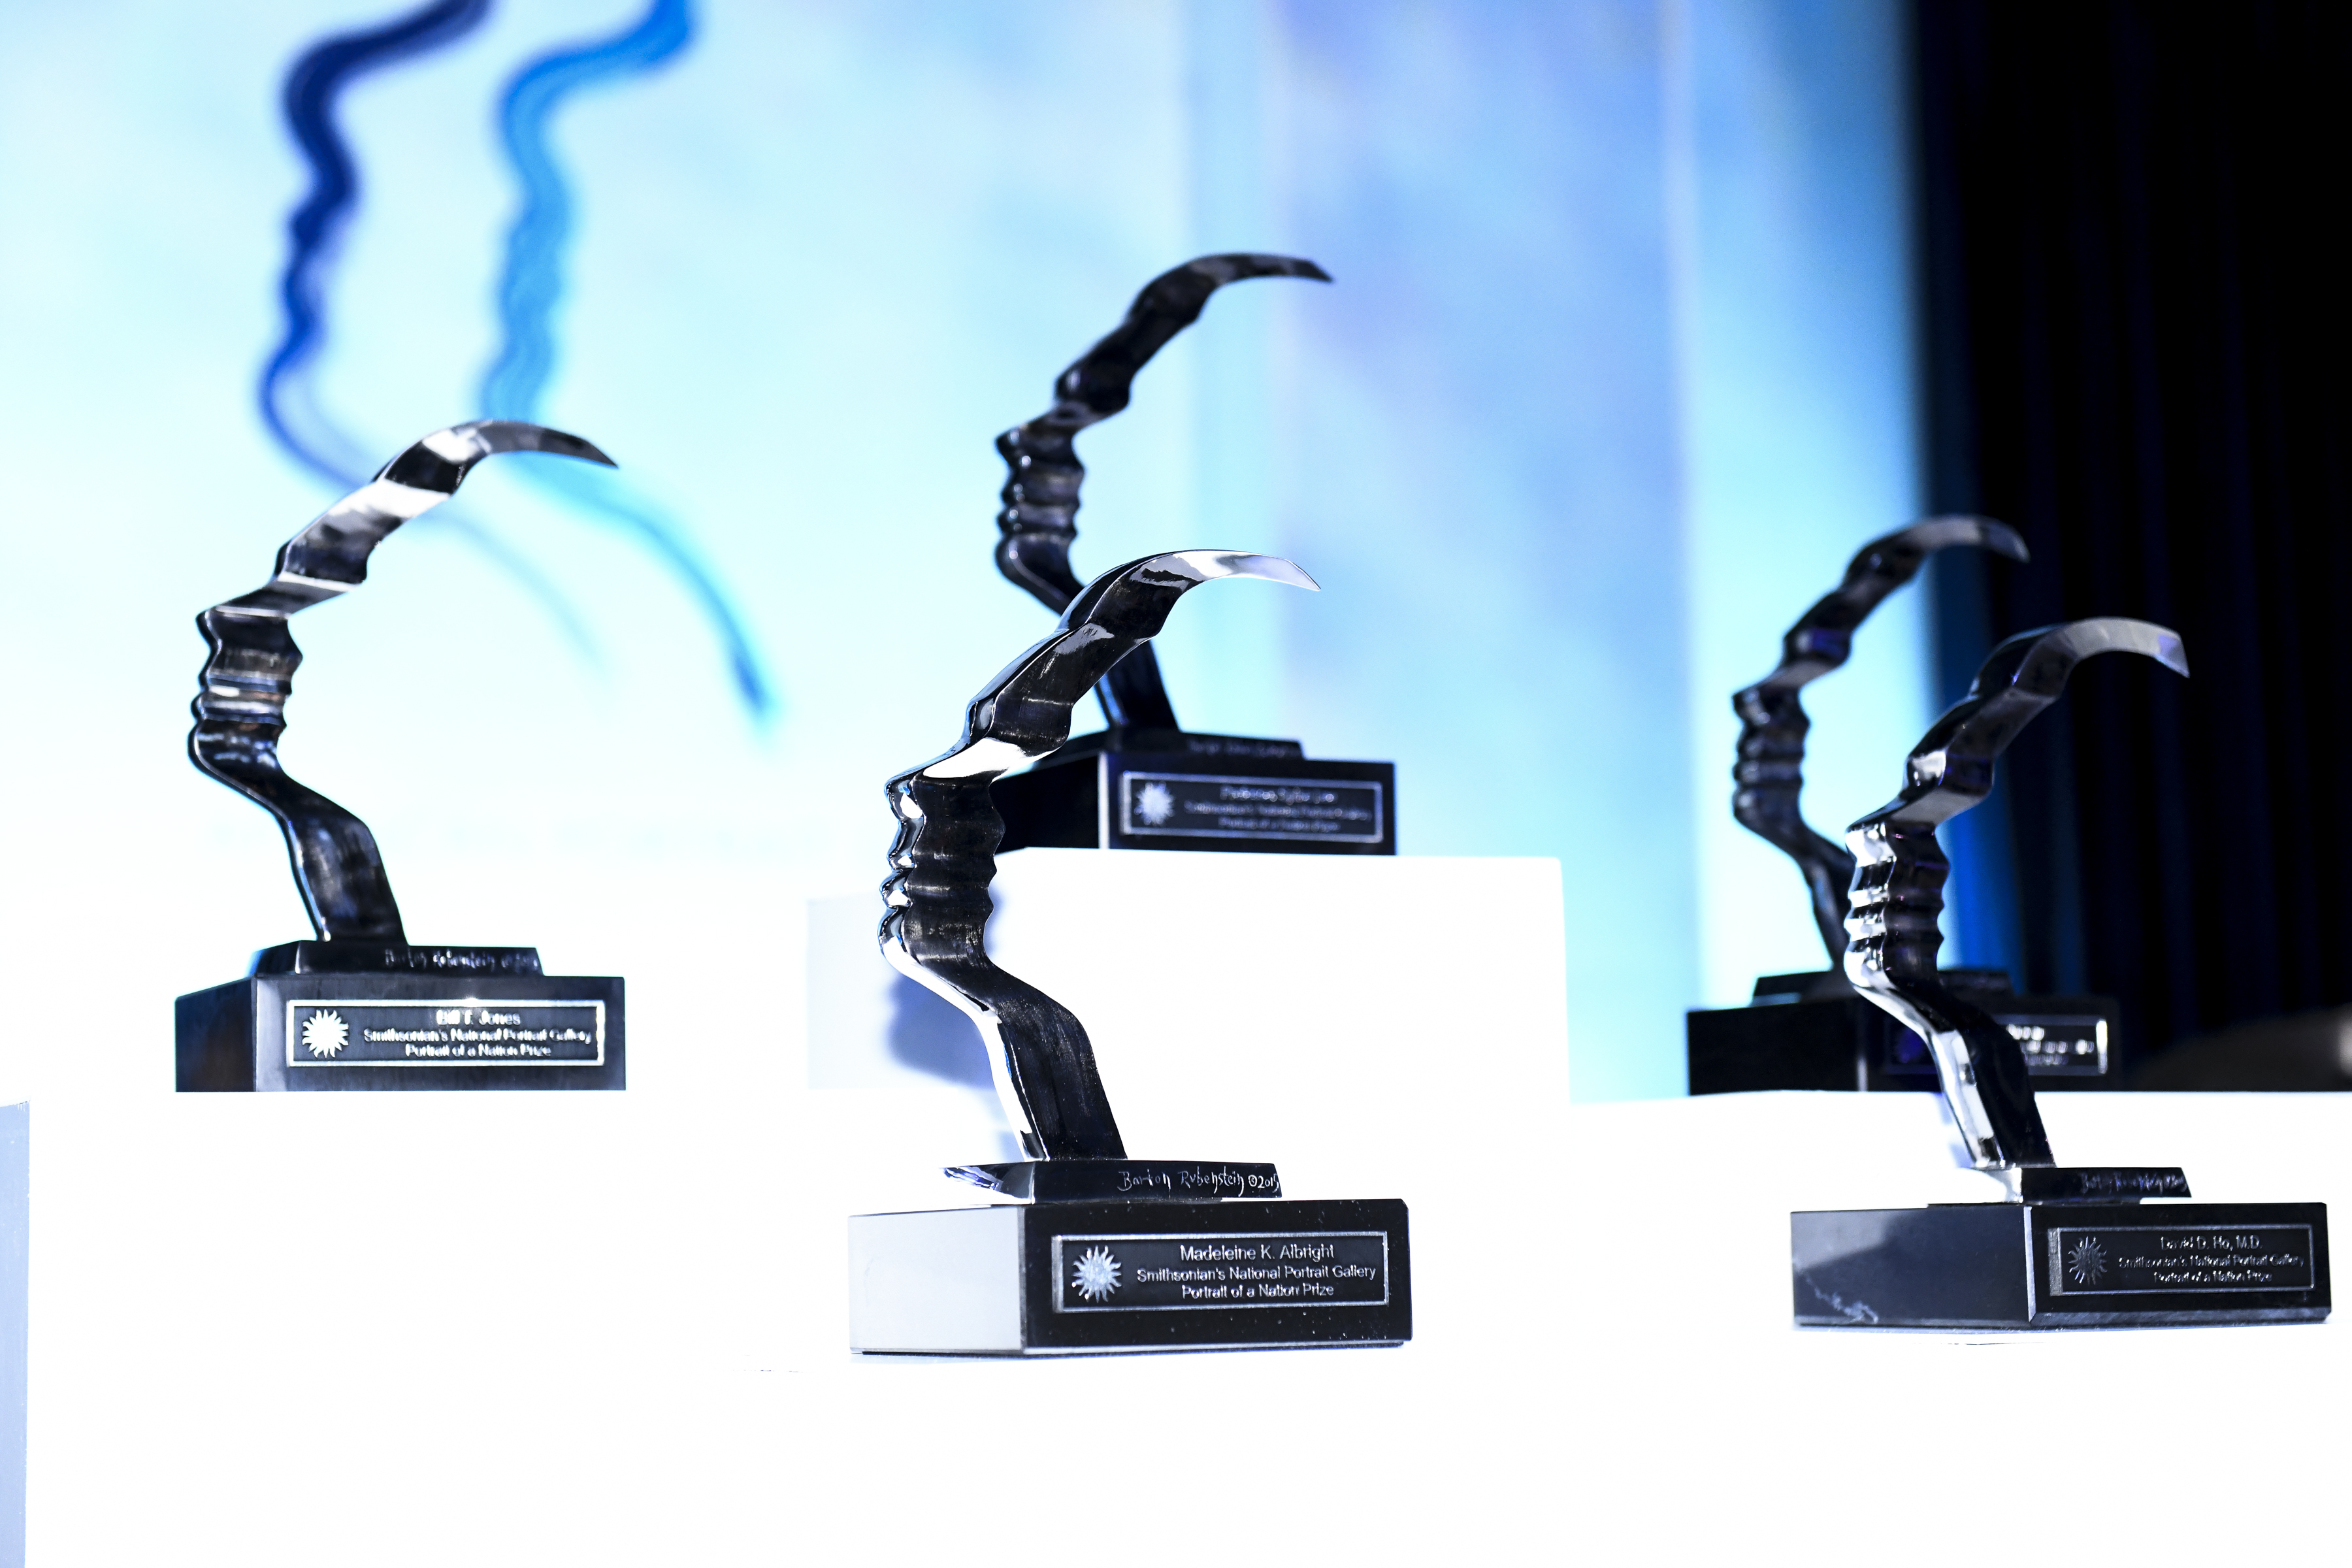 Four awards perched on display stands